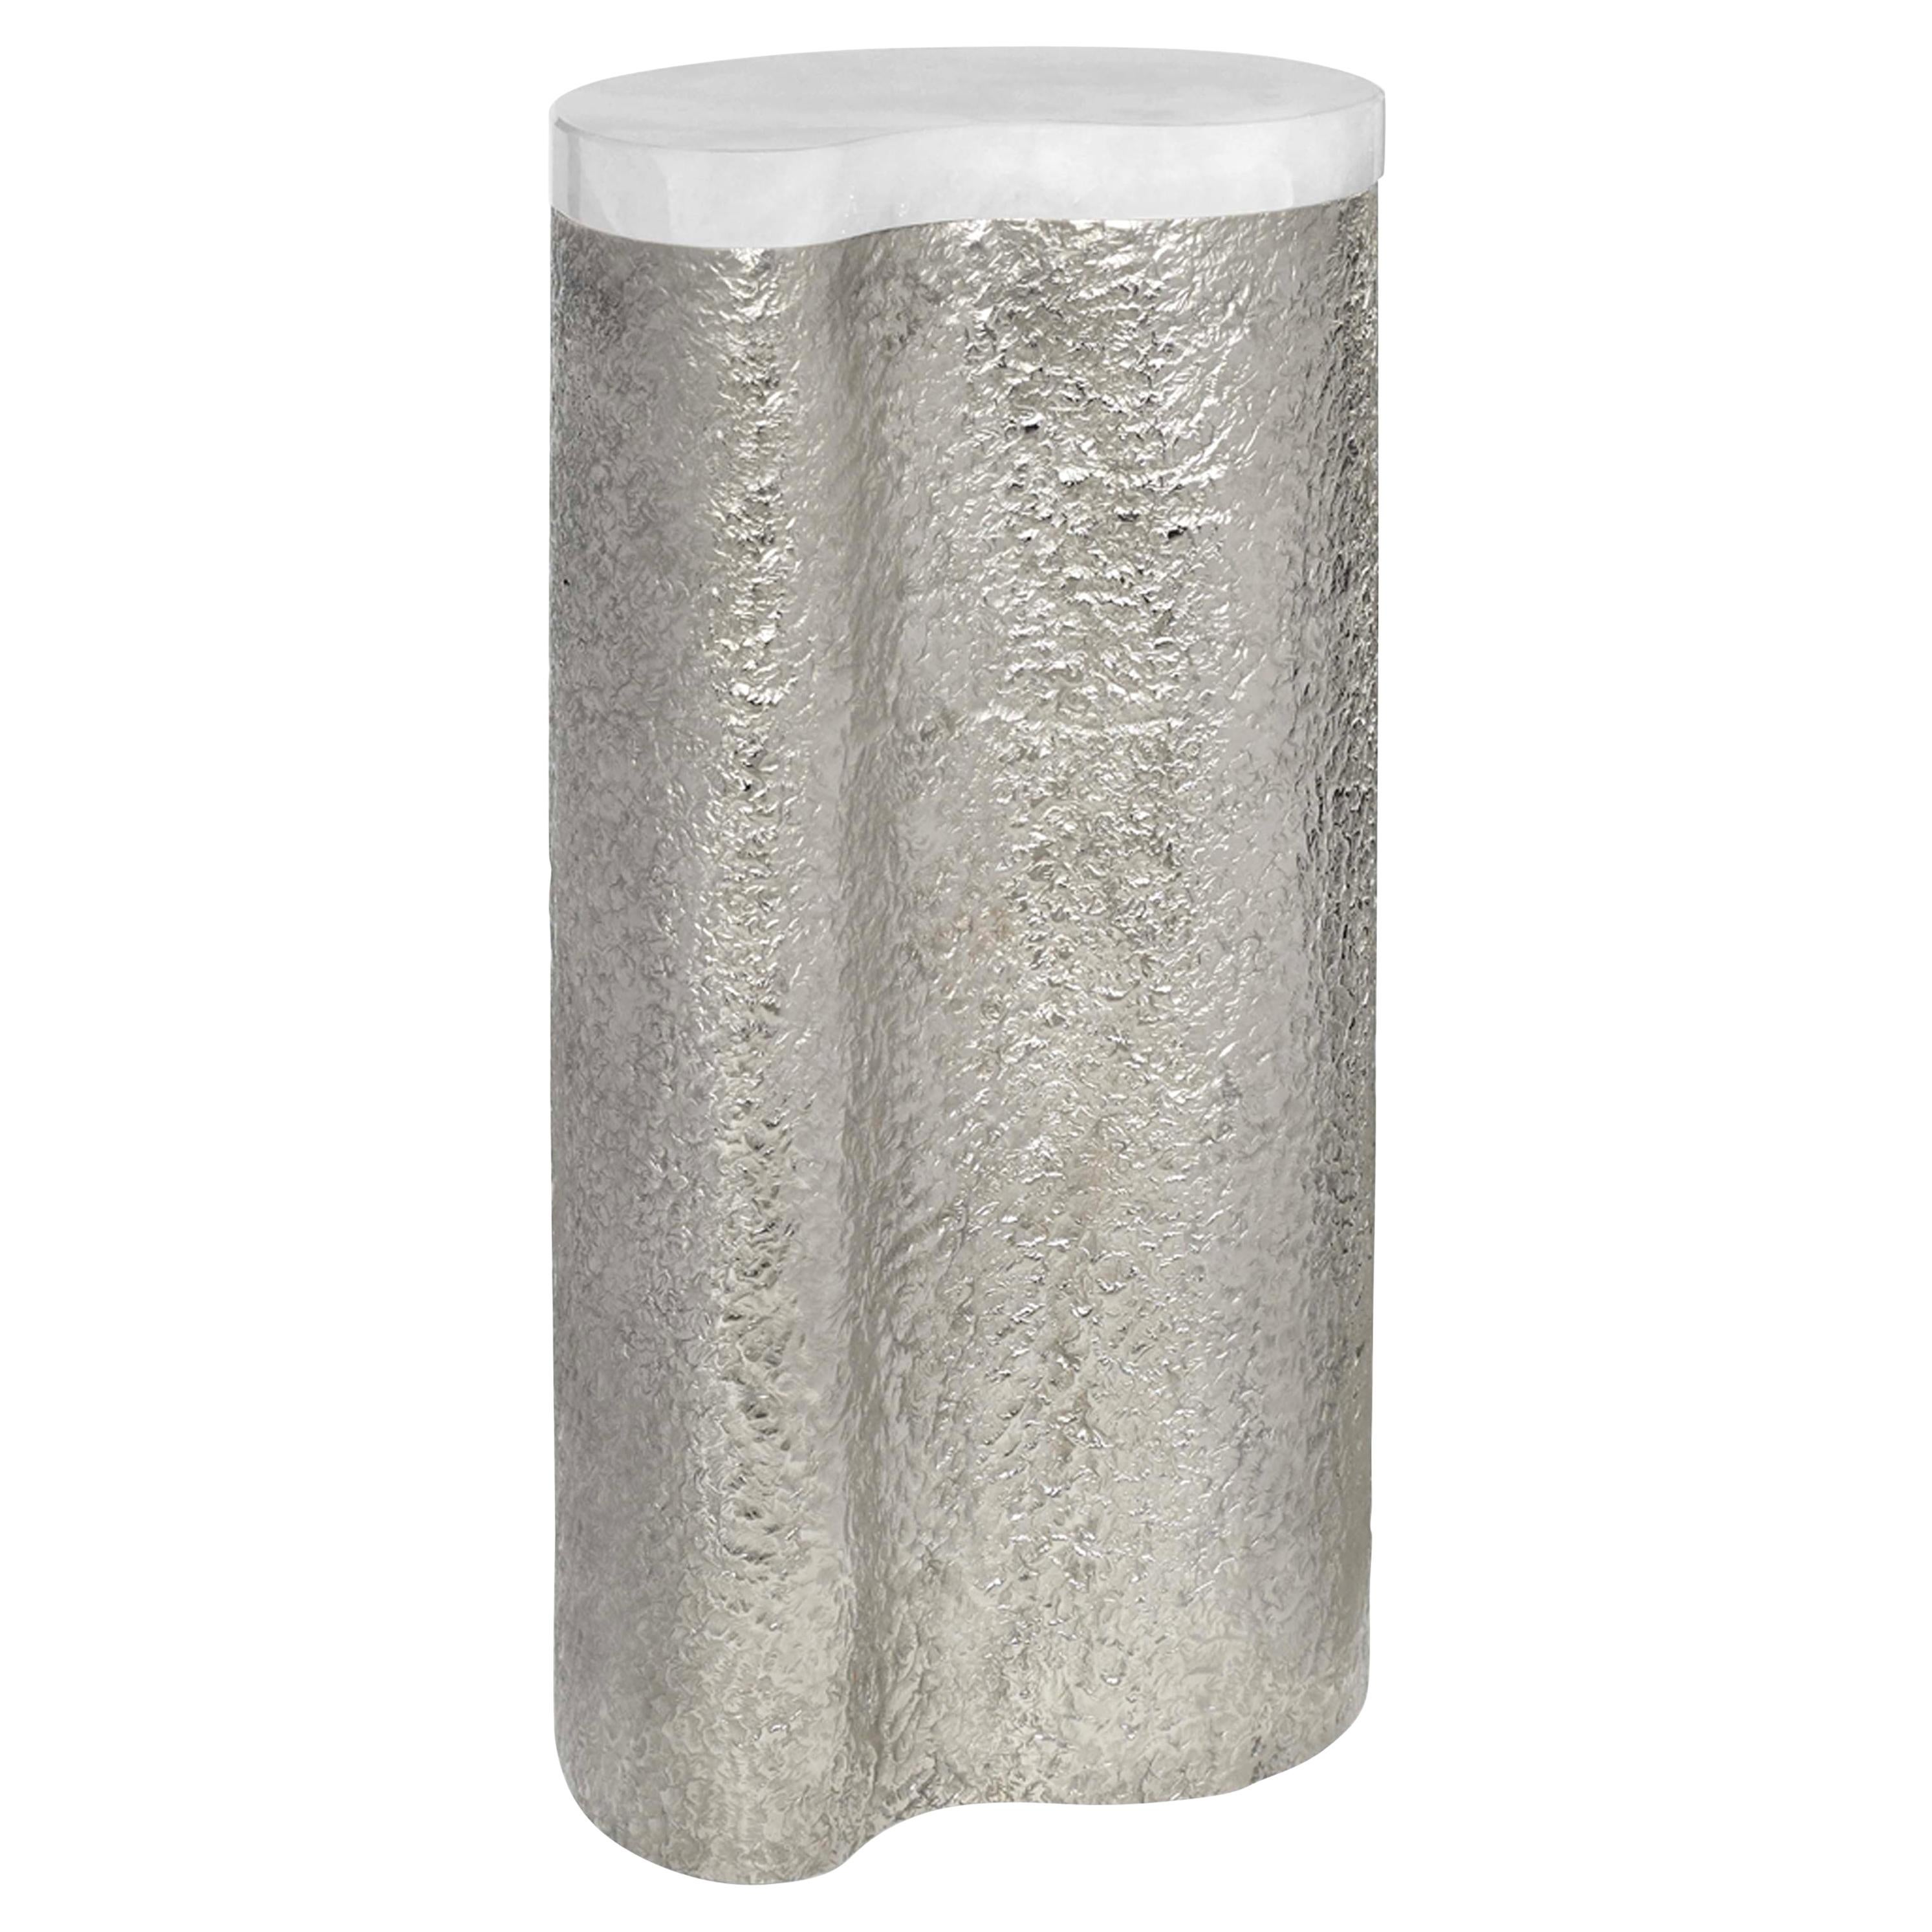 CLO I Rock Crystal Side Table by Phoenix For Sale